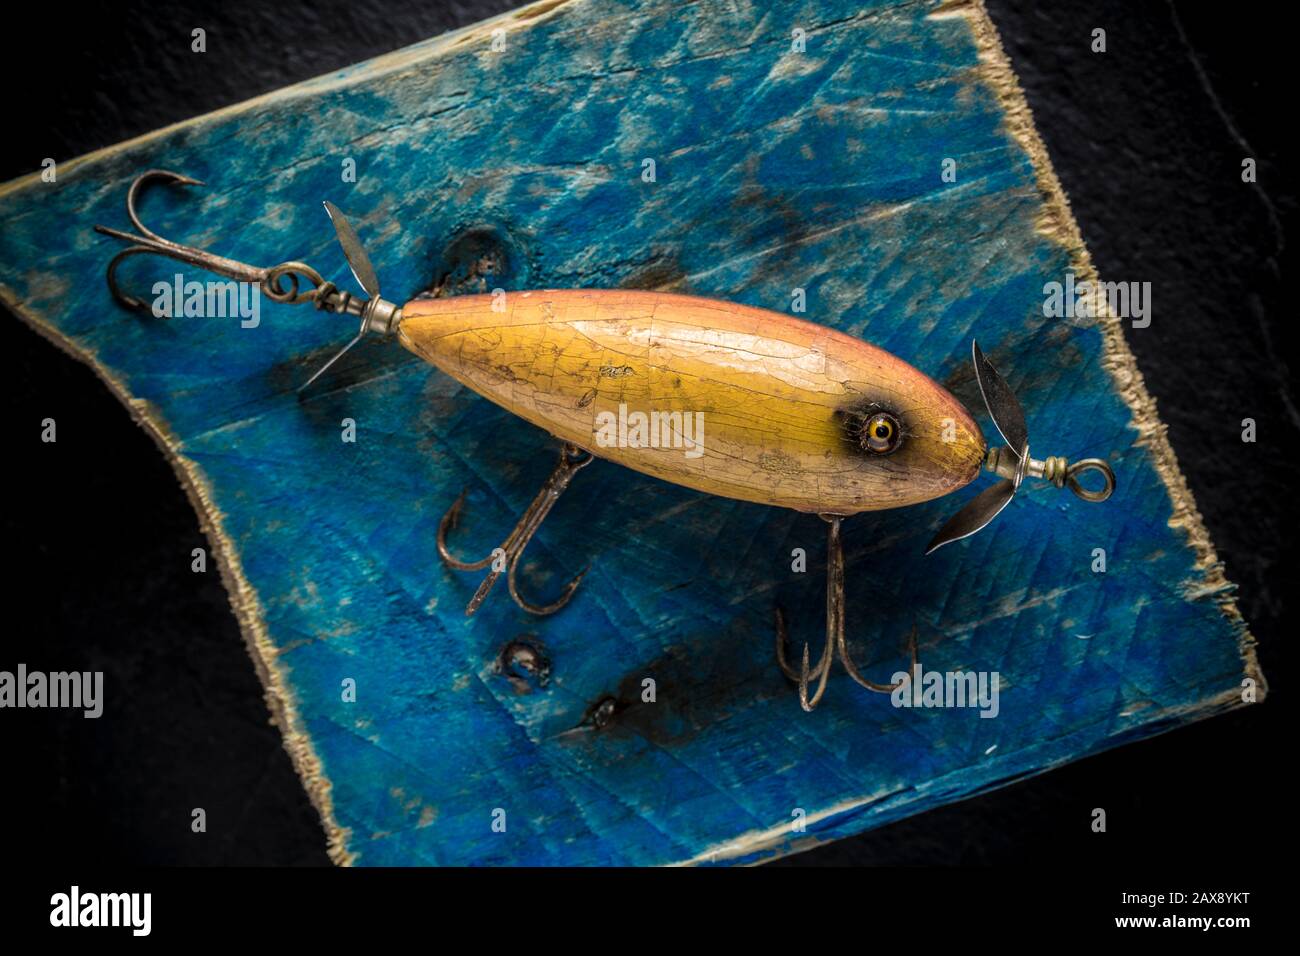 An old South Bend fishing lure, or plug, designed to catch predatory fish, photographed on a piece of driftwood. The lure came from a collection of vi Stock Photo